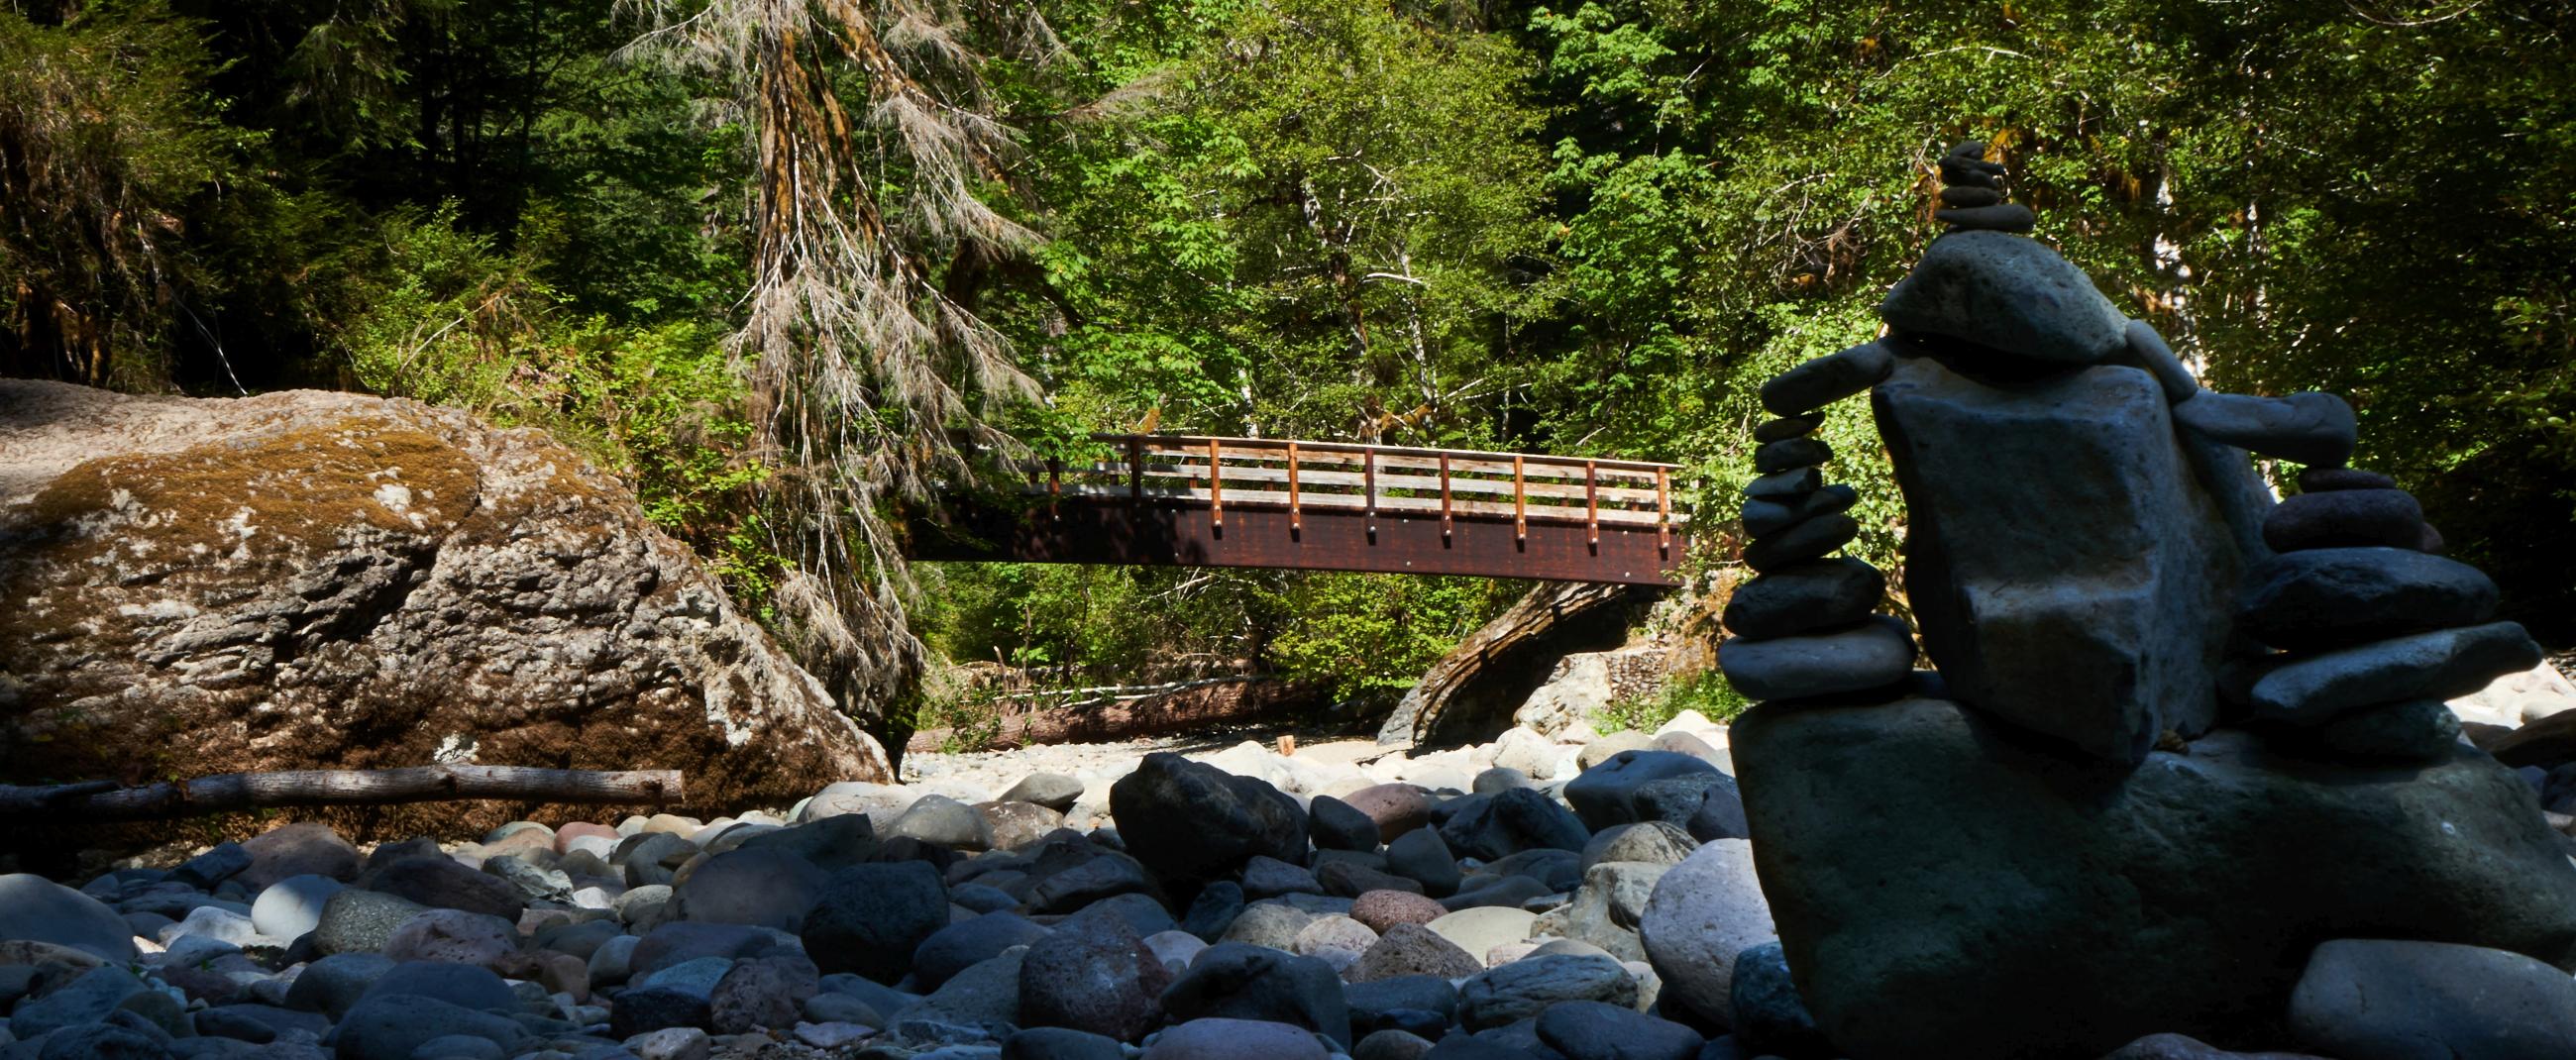 Wooden bridge with rock stack in the foreground